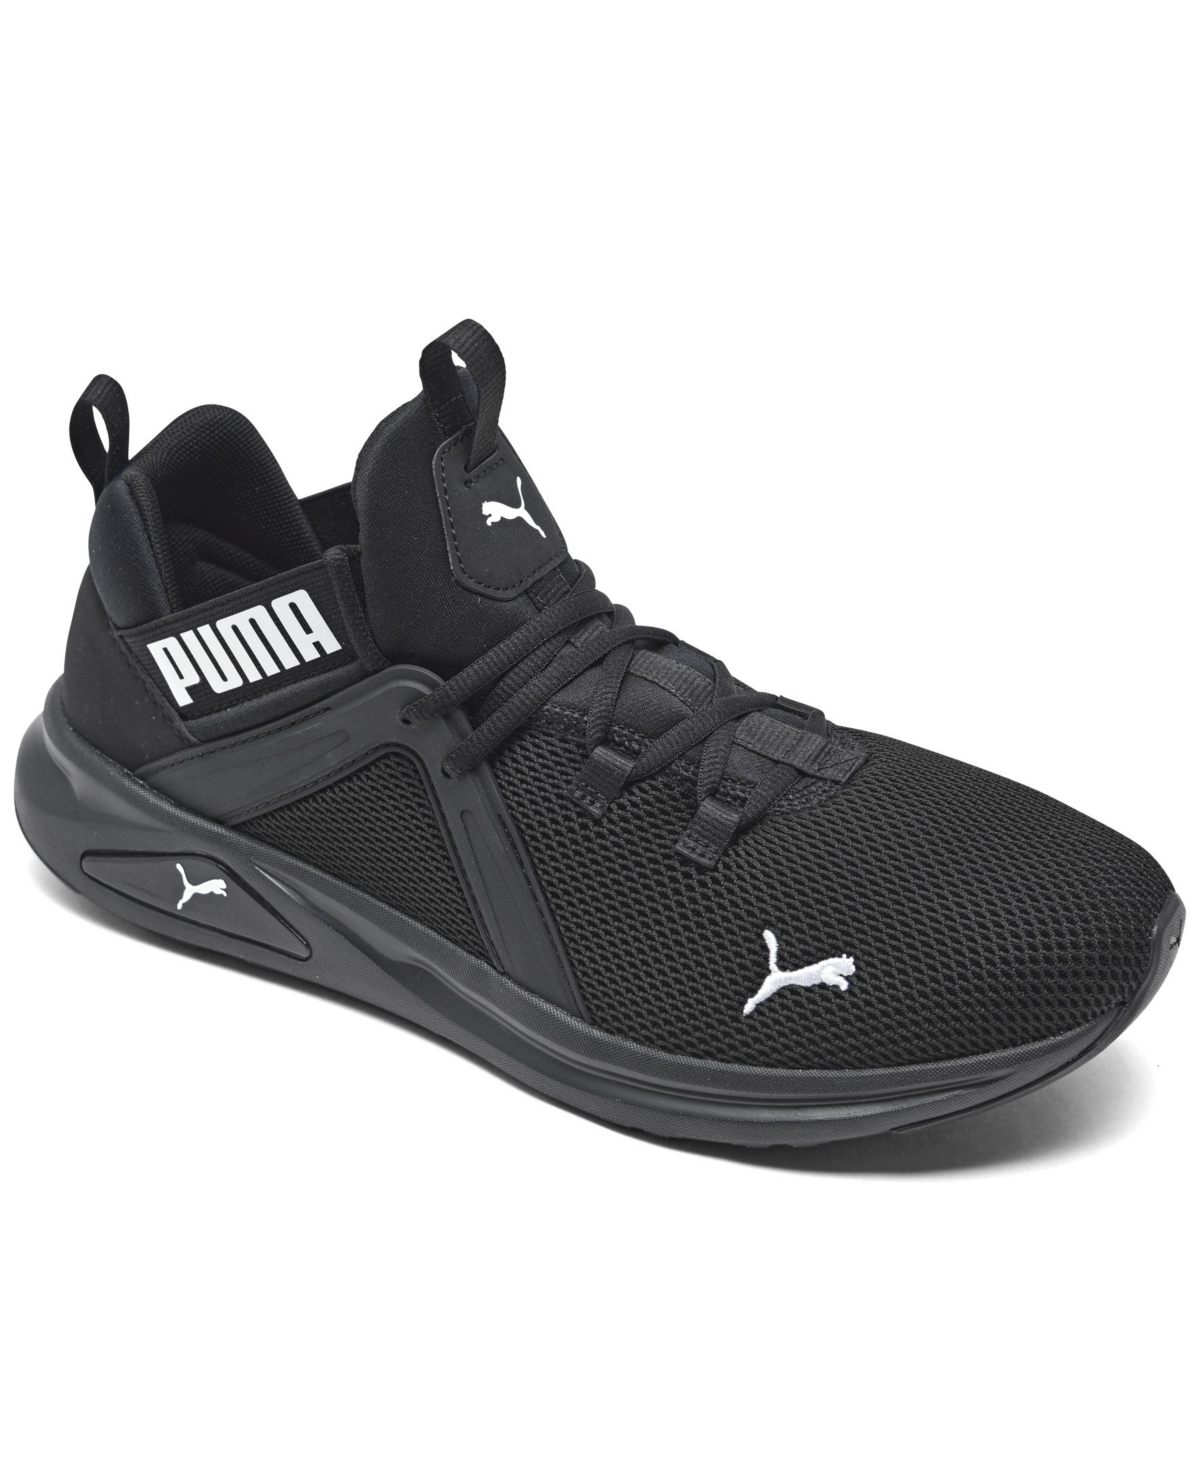 Puma Men's Enzo 2 Running Sneakers from Finish Line Reviews | Sku ...